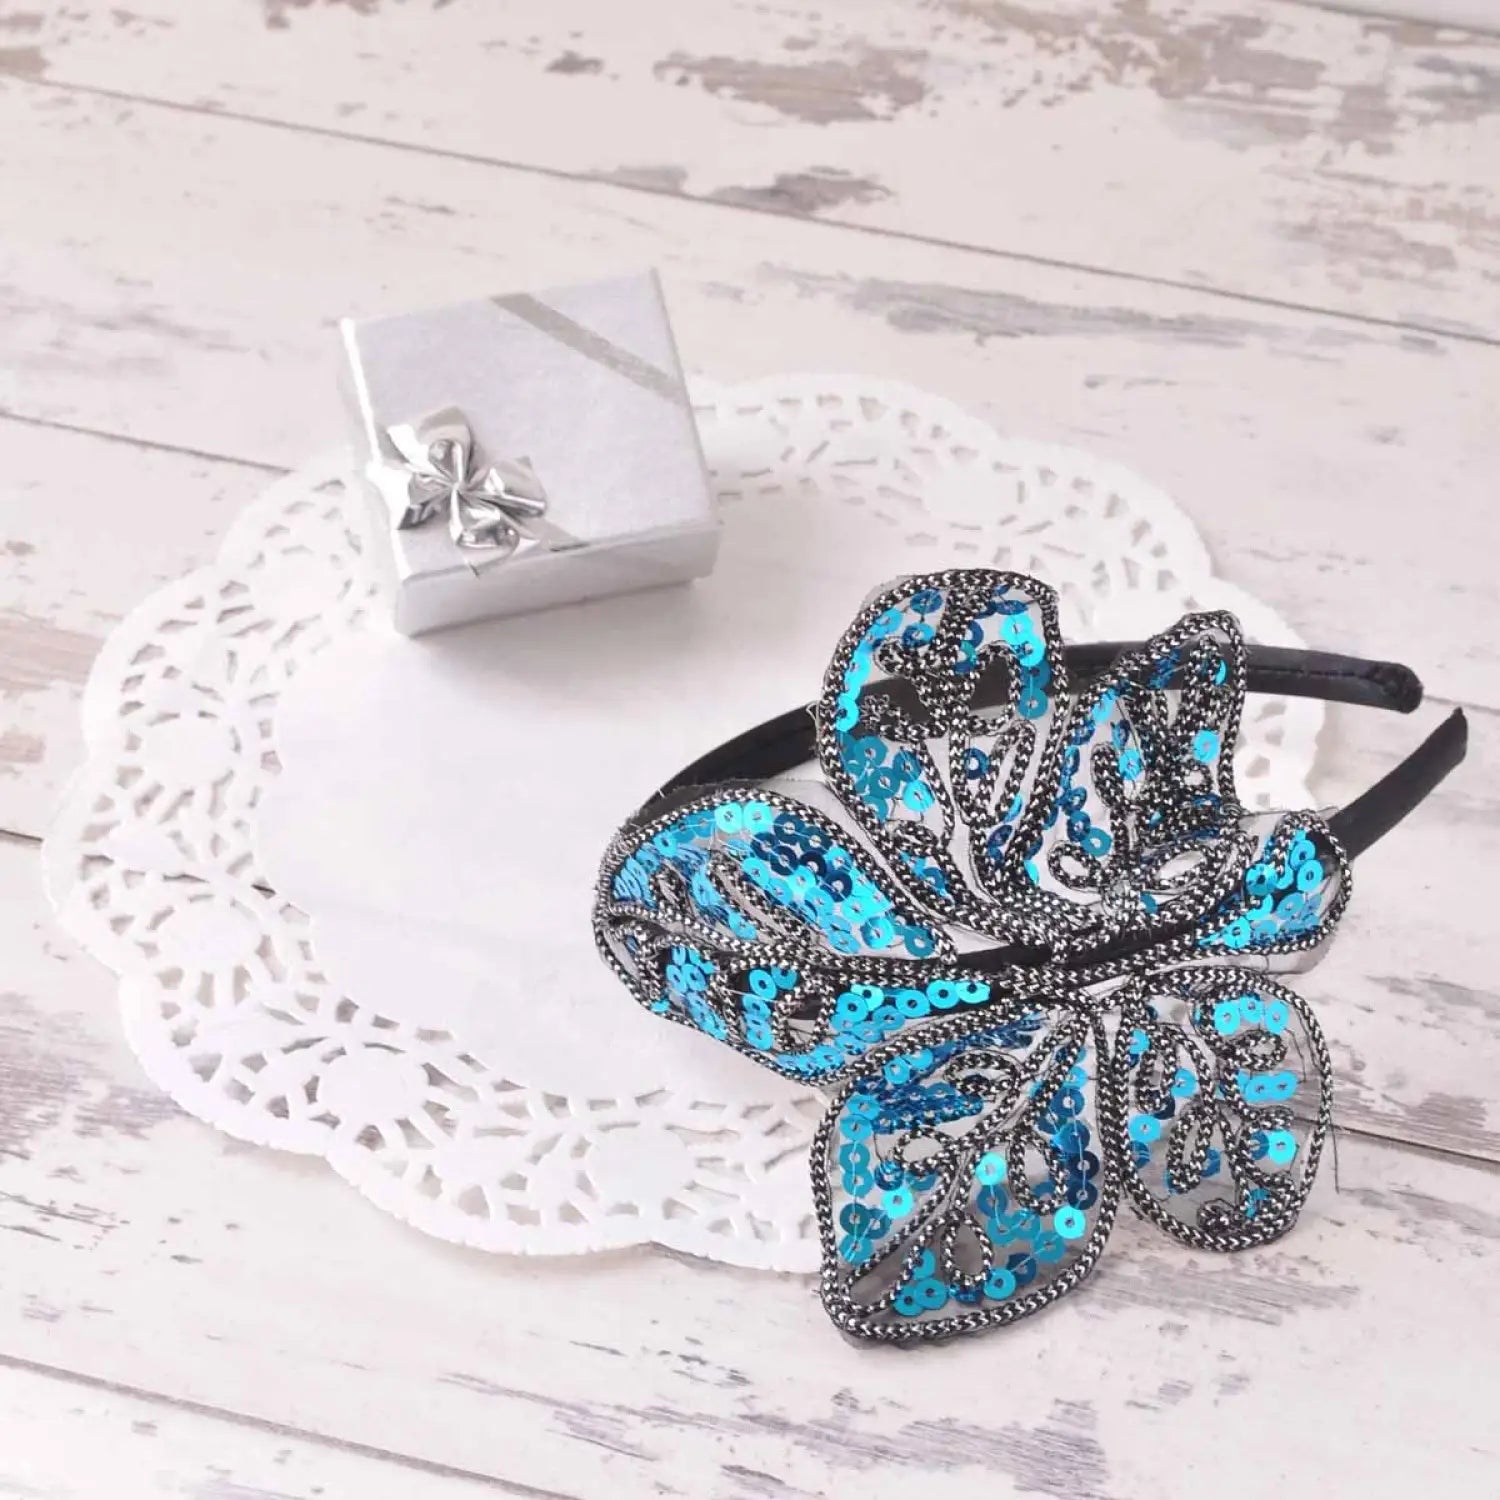 Blue and black flower headband with lace edge, Elegant Leaf Alice Headband with Spangle & Sequin Detailing.